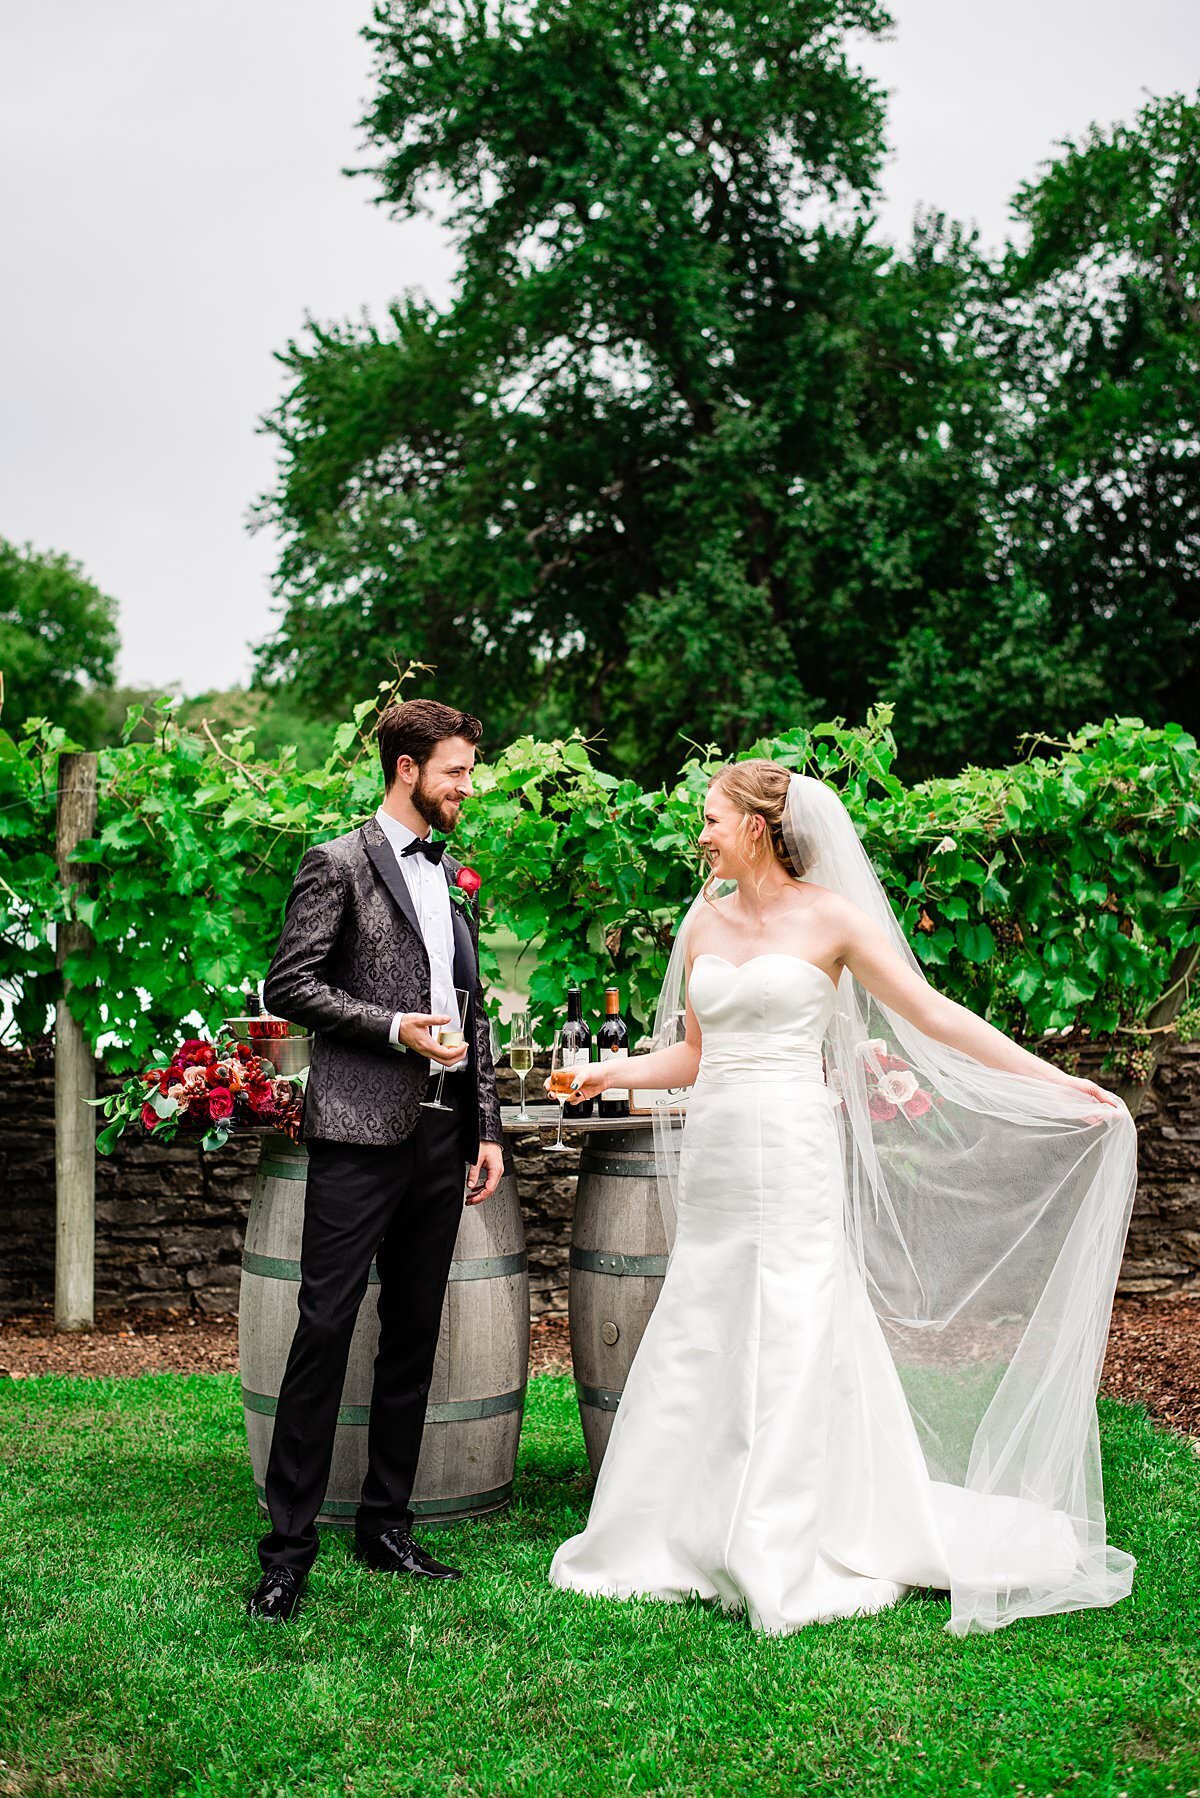 Newlyweds standing next to wine bar on a summer day next to the green vineyards